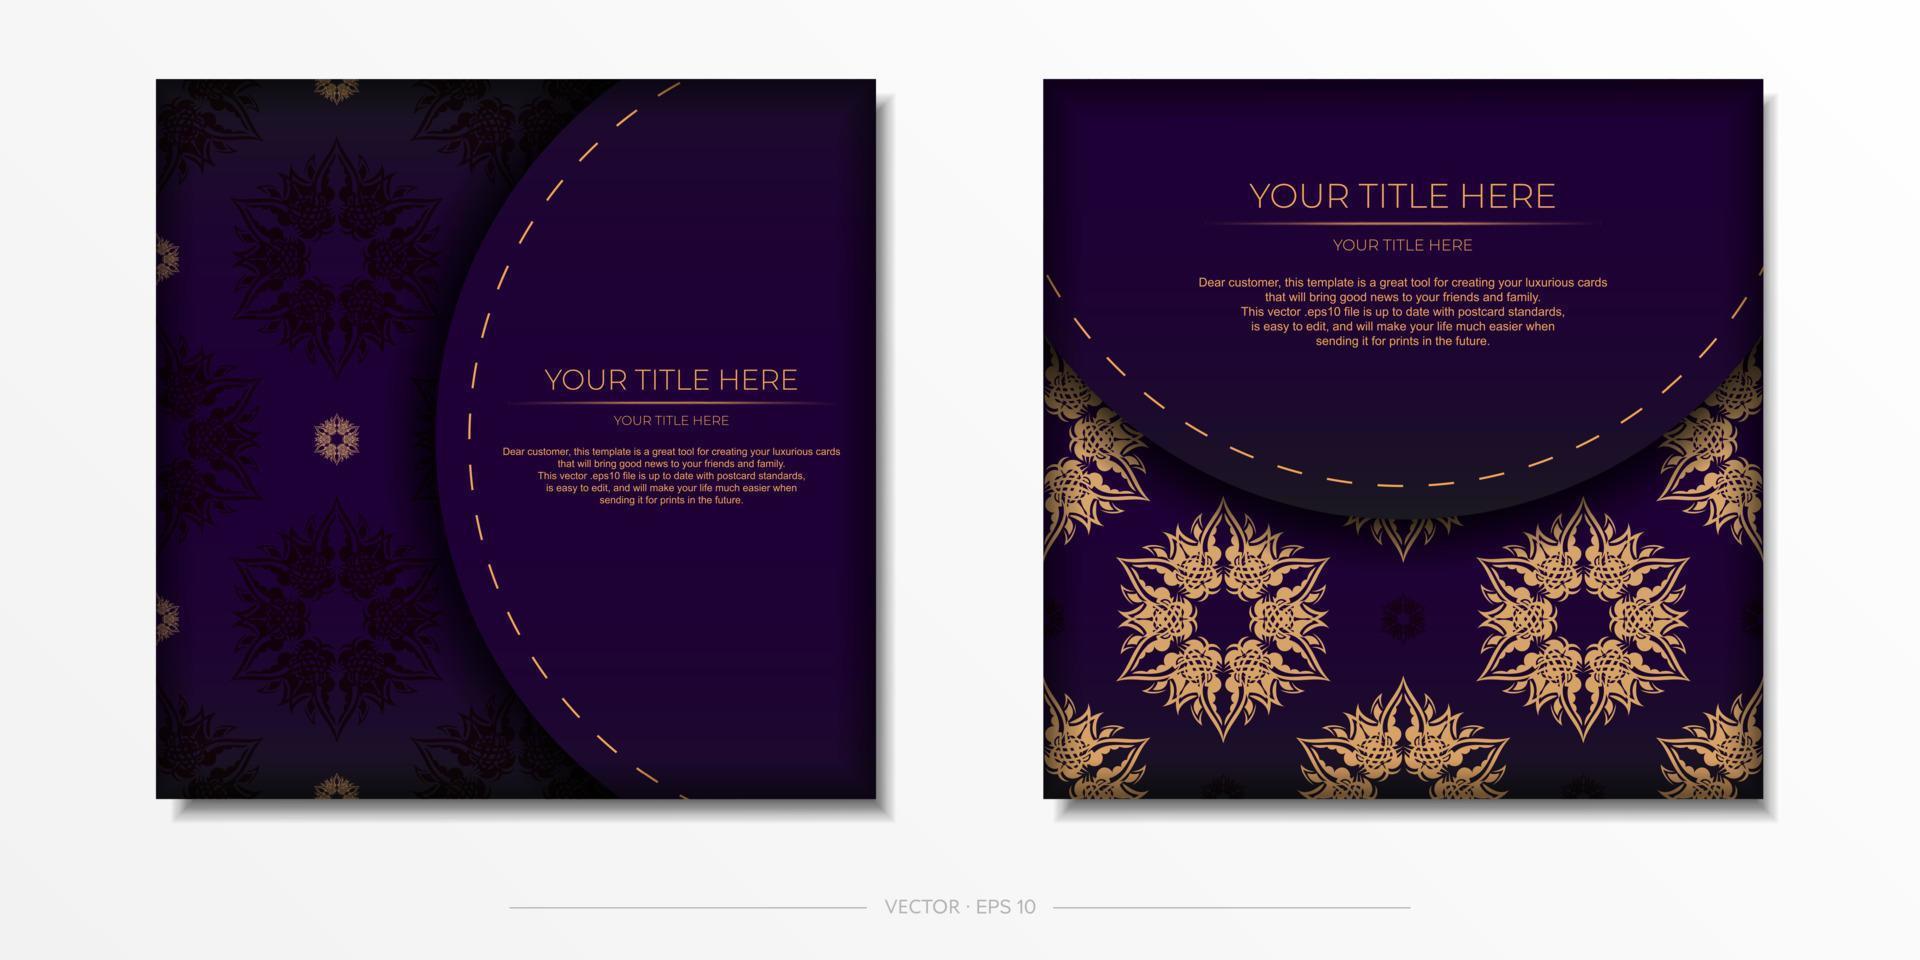 Luxurious purple square postcard template with vintage indian ornaments. Elegant and classic vector elements ready for print and typography.